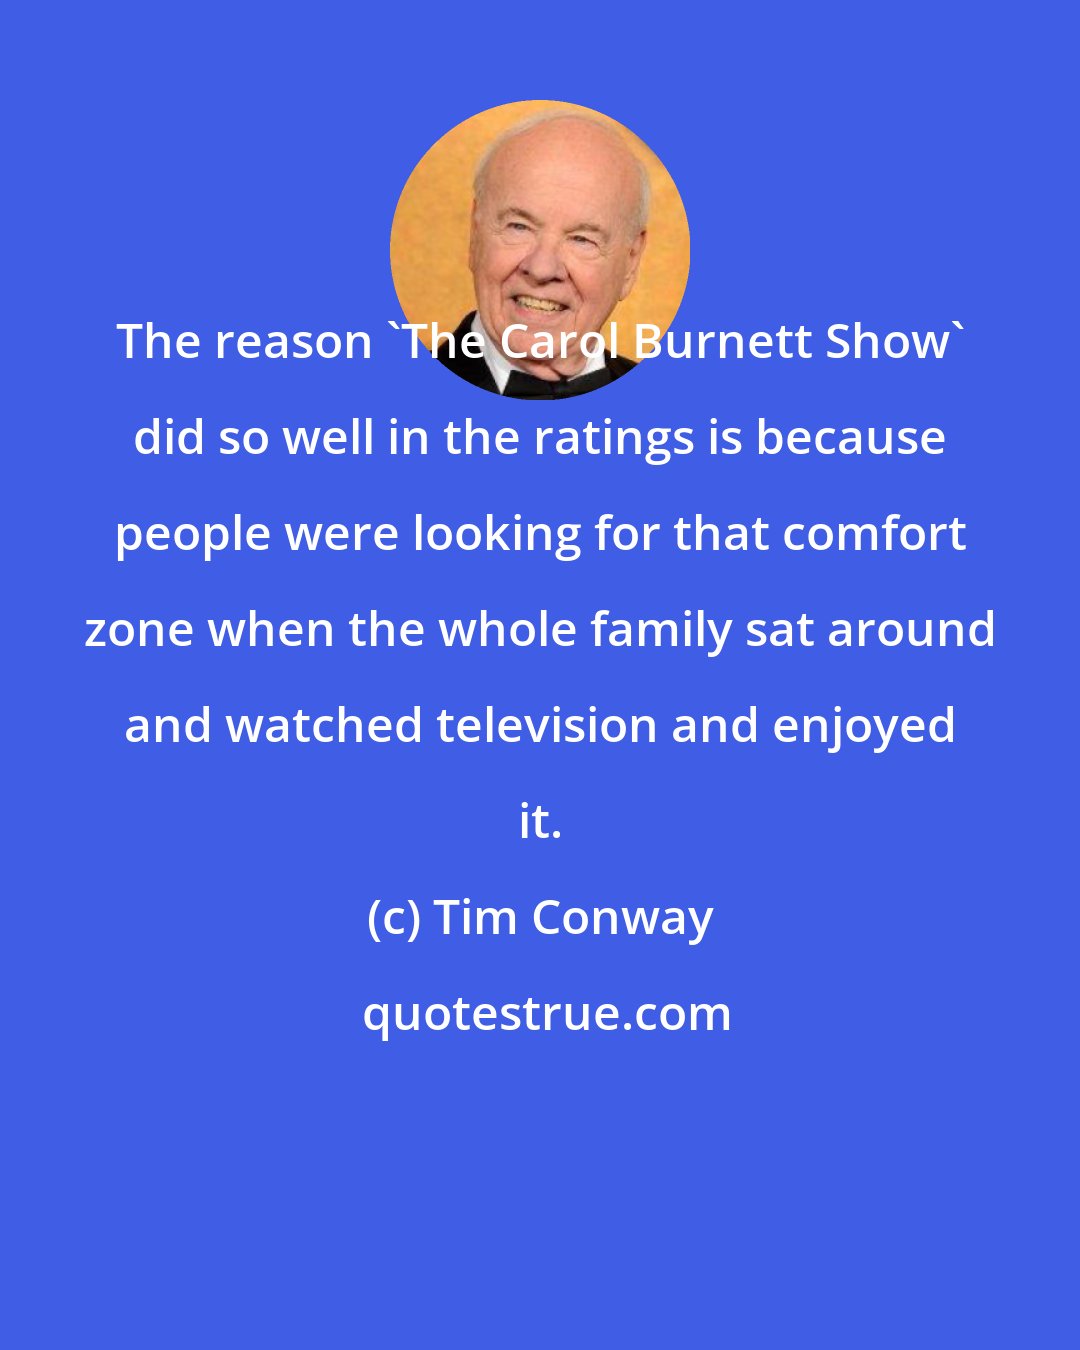 Tim Conway: The reason 'The Carol Burnett Show' did so well in the ratings is because people were looking for that comfort zone when the whole family sat around and watched television and enjoyed it.